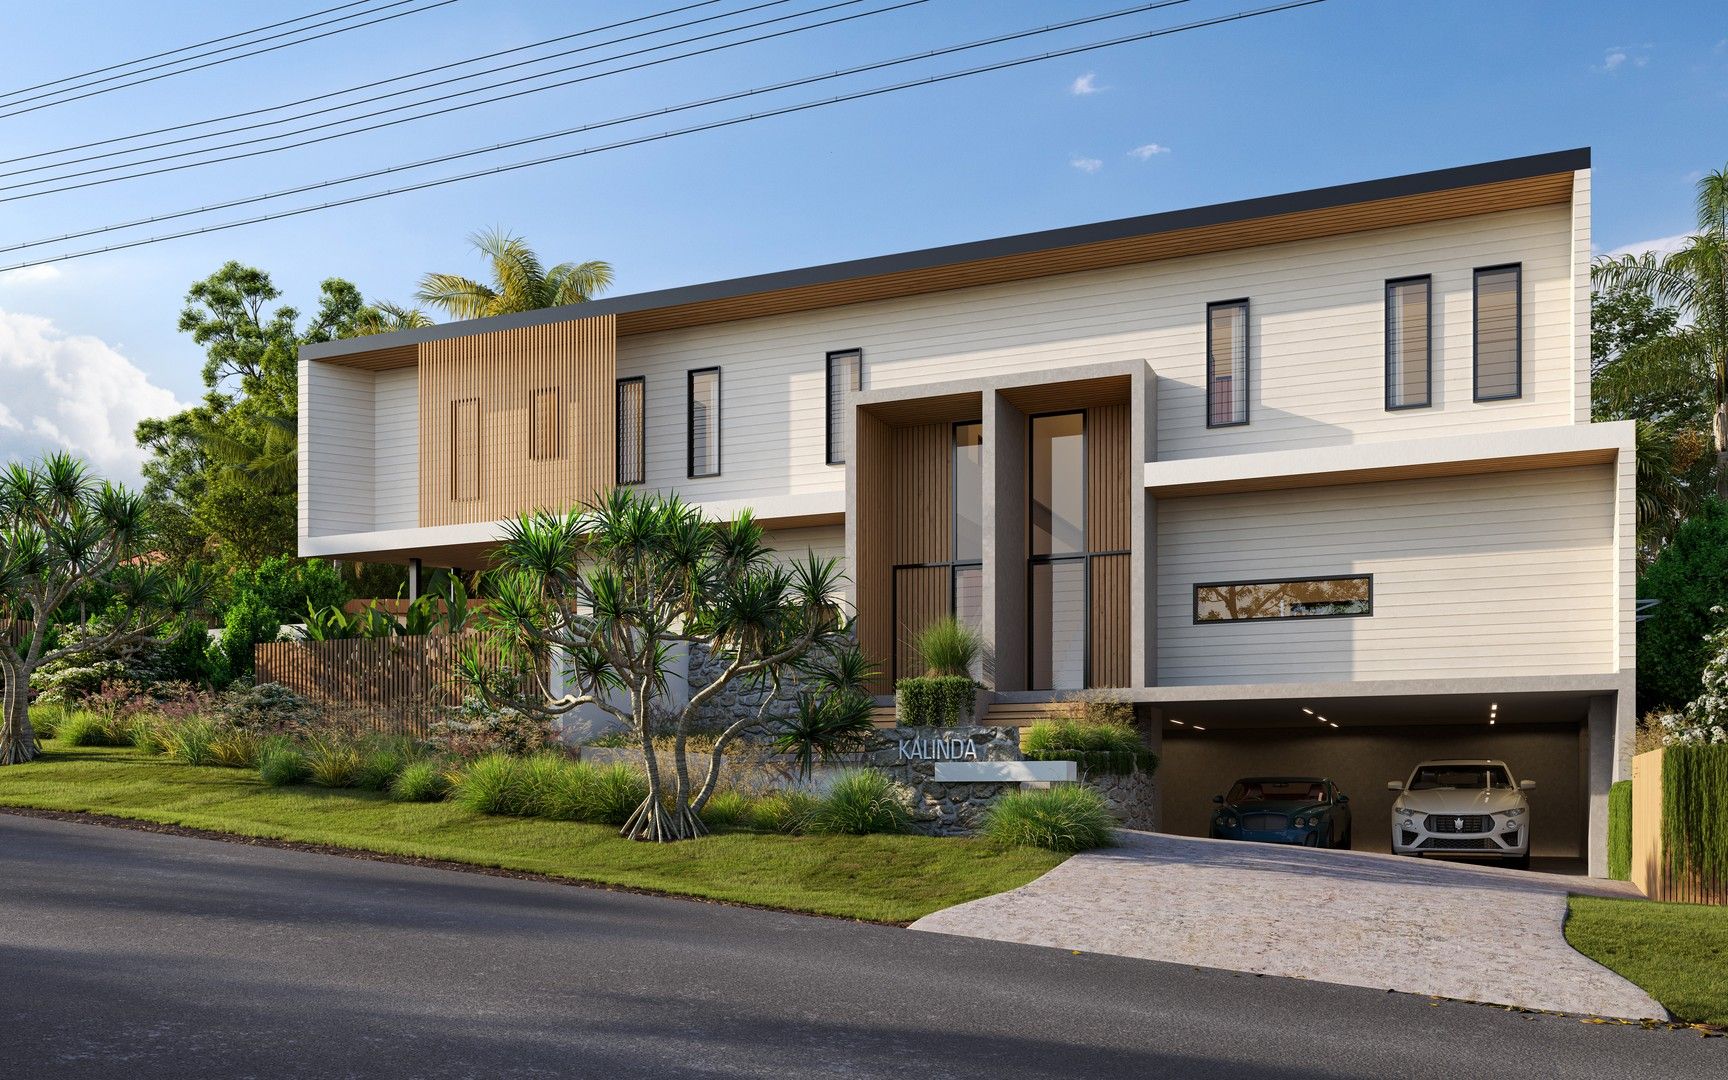 2 bedrooms New Apartments / Off the Plan in 164 Edwards St SUNSHINE BEACH QLD, 4567